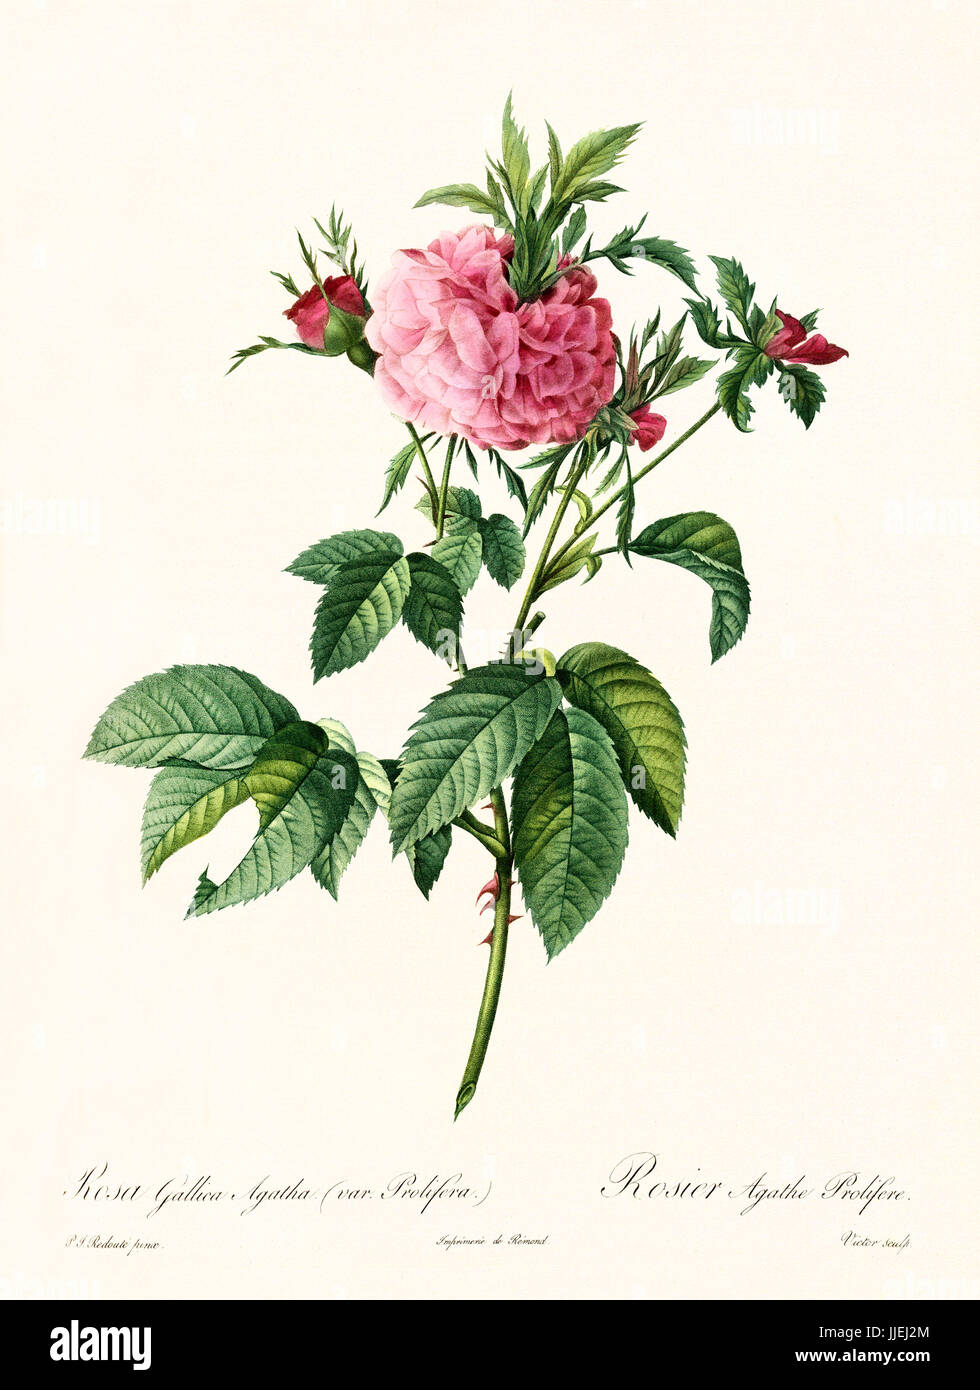 Old illustration of Rosa gallica agatha prolifera. Created by P. R. Redoute, published on Les Roses, Imp. Firmin Didot, Paris, 1817-24 Stock Photo